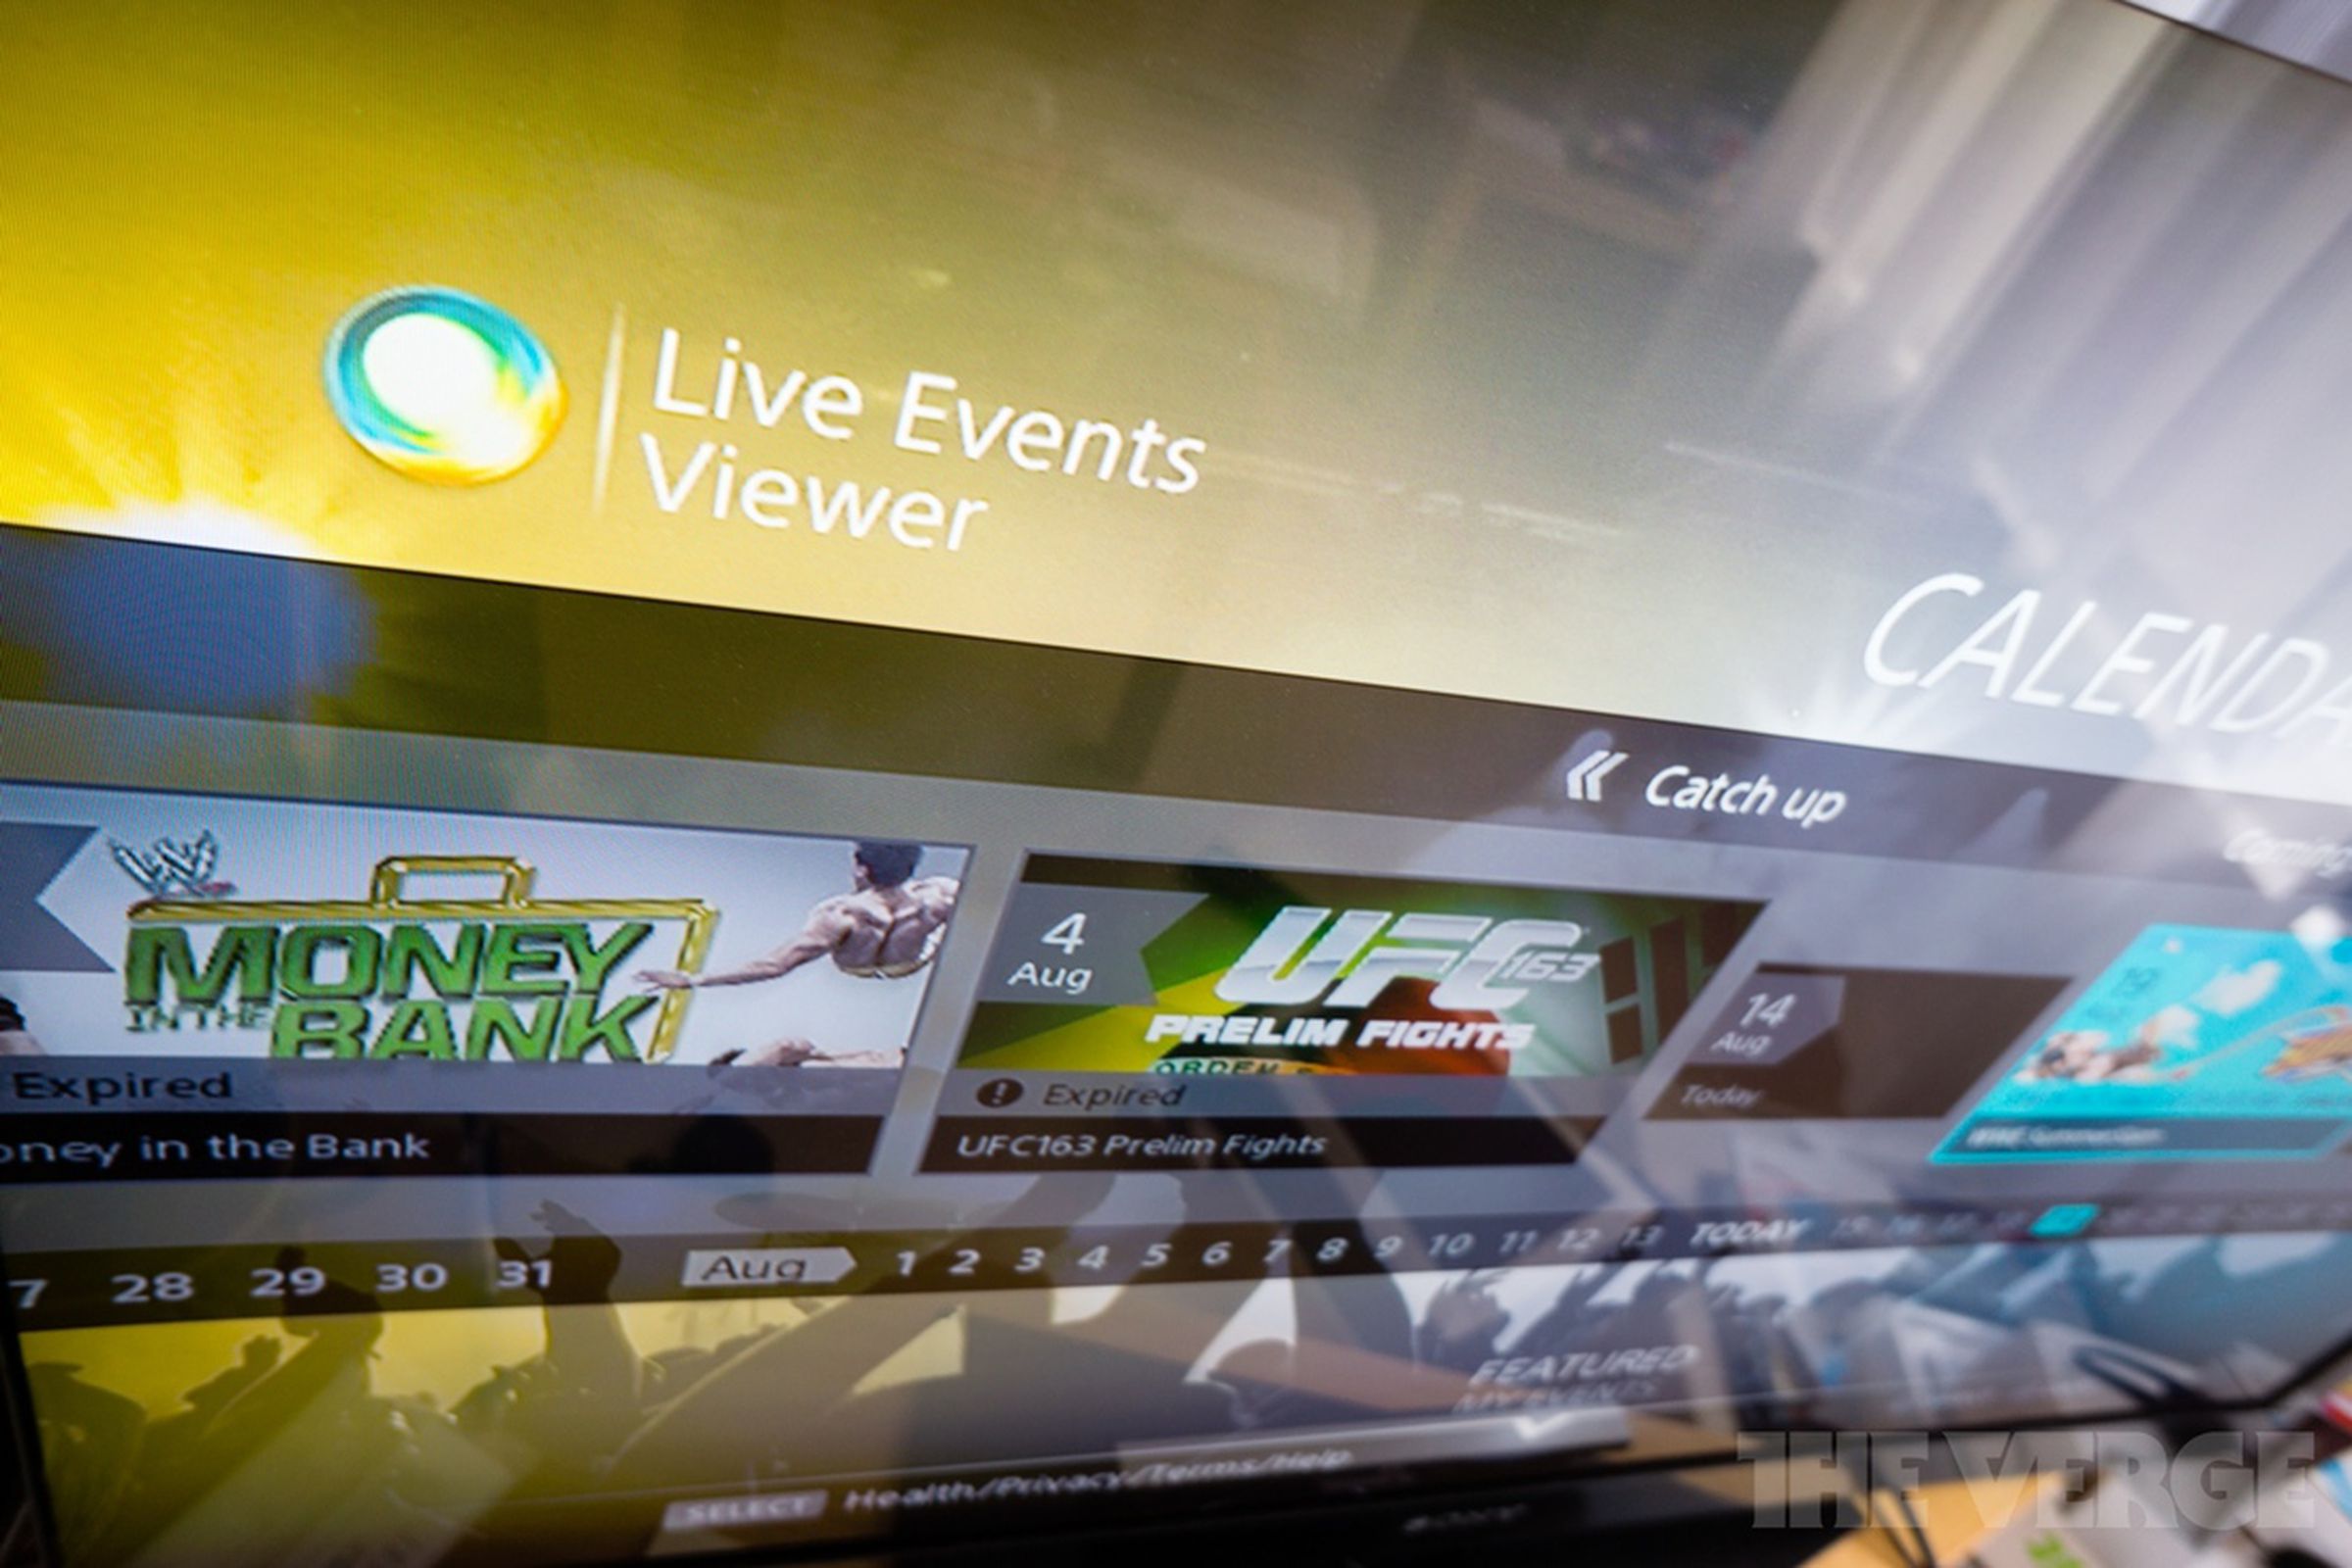 ps3 live events viewer 2040 stock